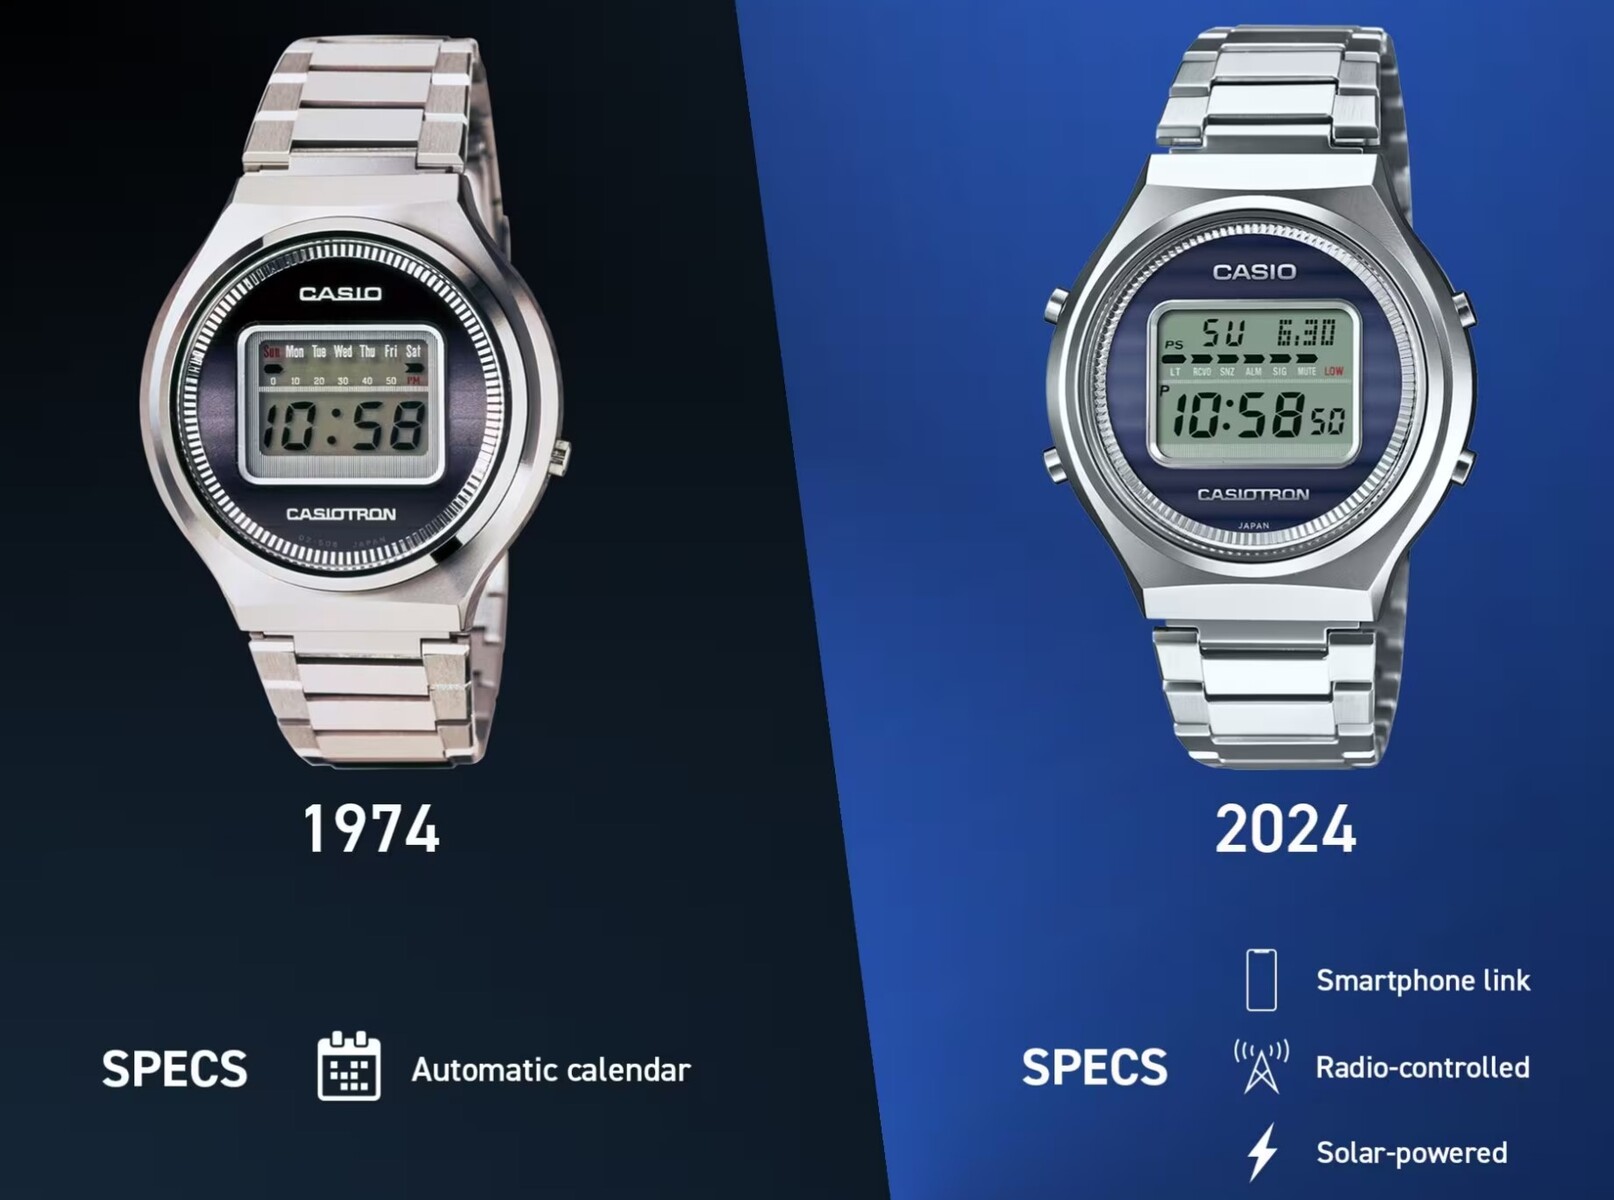 Casio Celebrates 50th Anniversary with New Limited Casiotron Edition